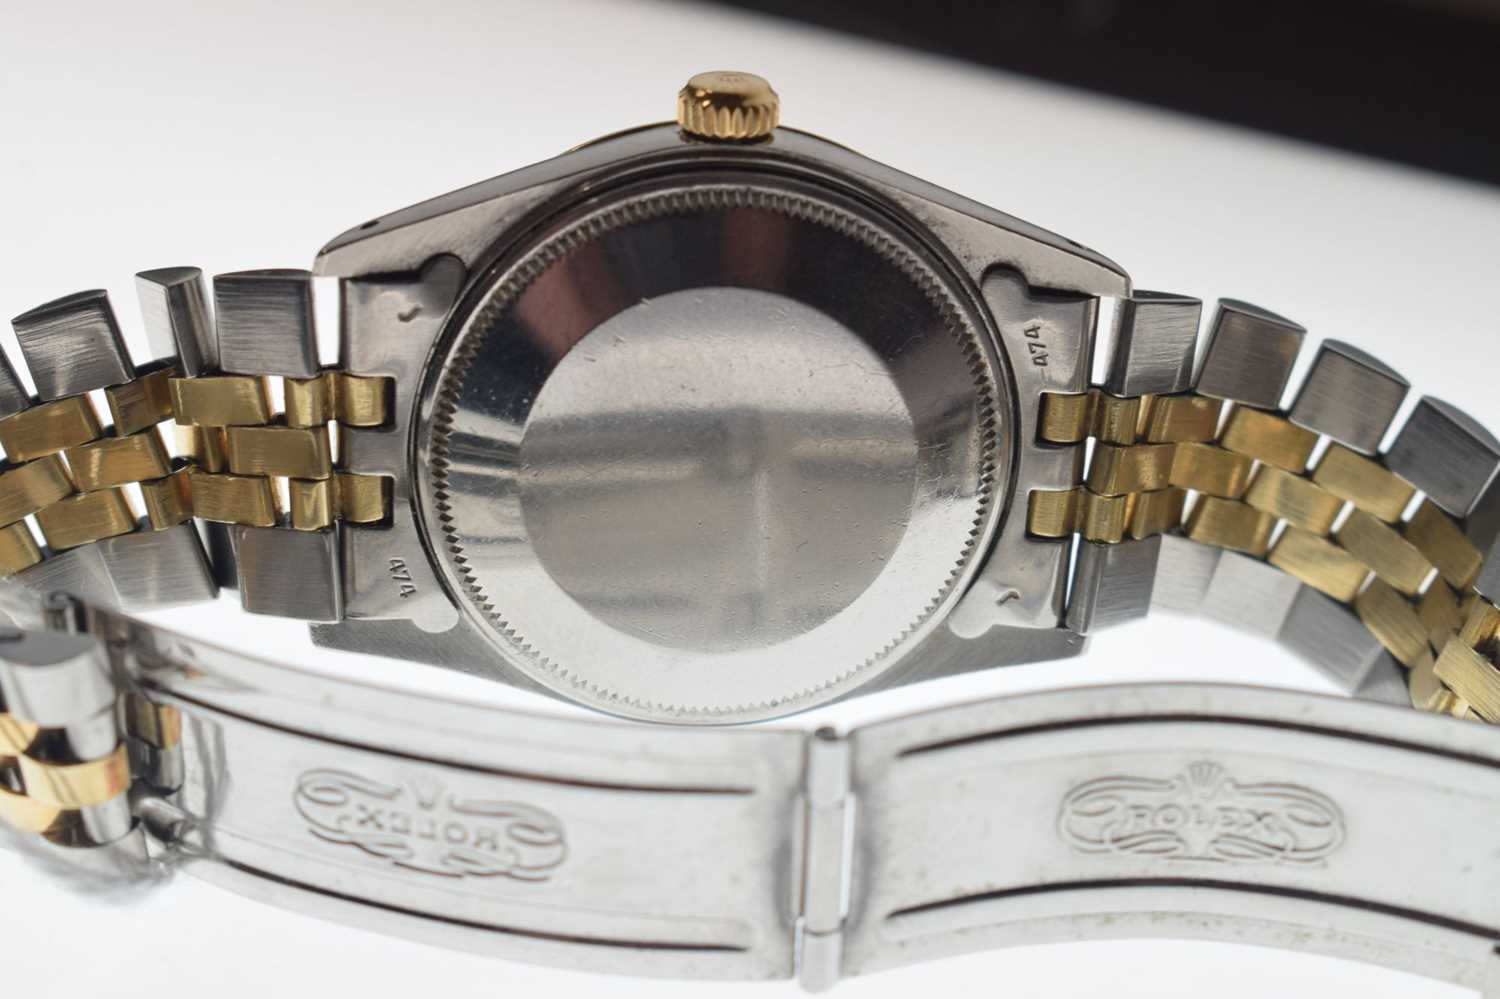 Rolex - Early 1980s Datejust Oyster Perpetual Superlative Chronometer - Image 8 of 16